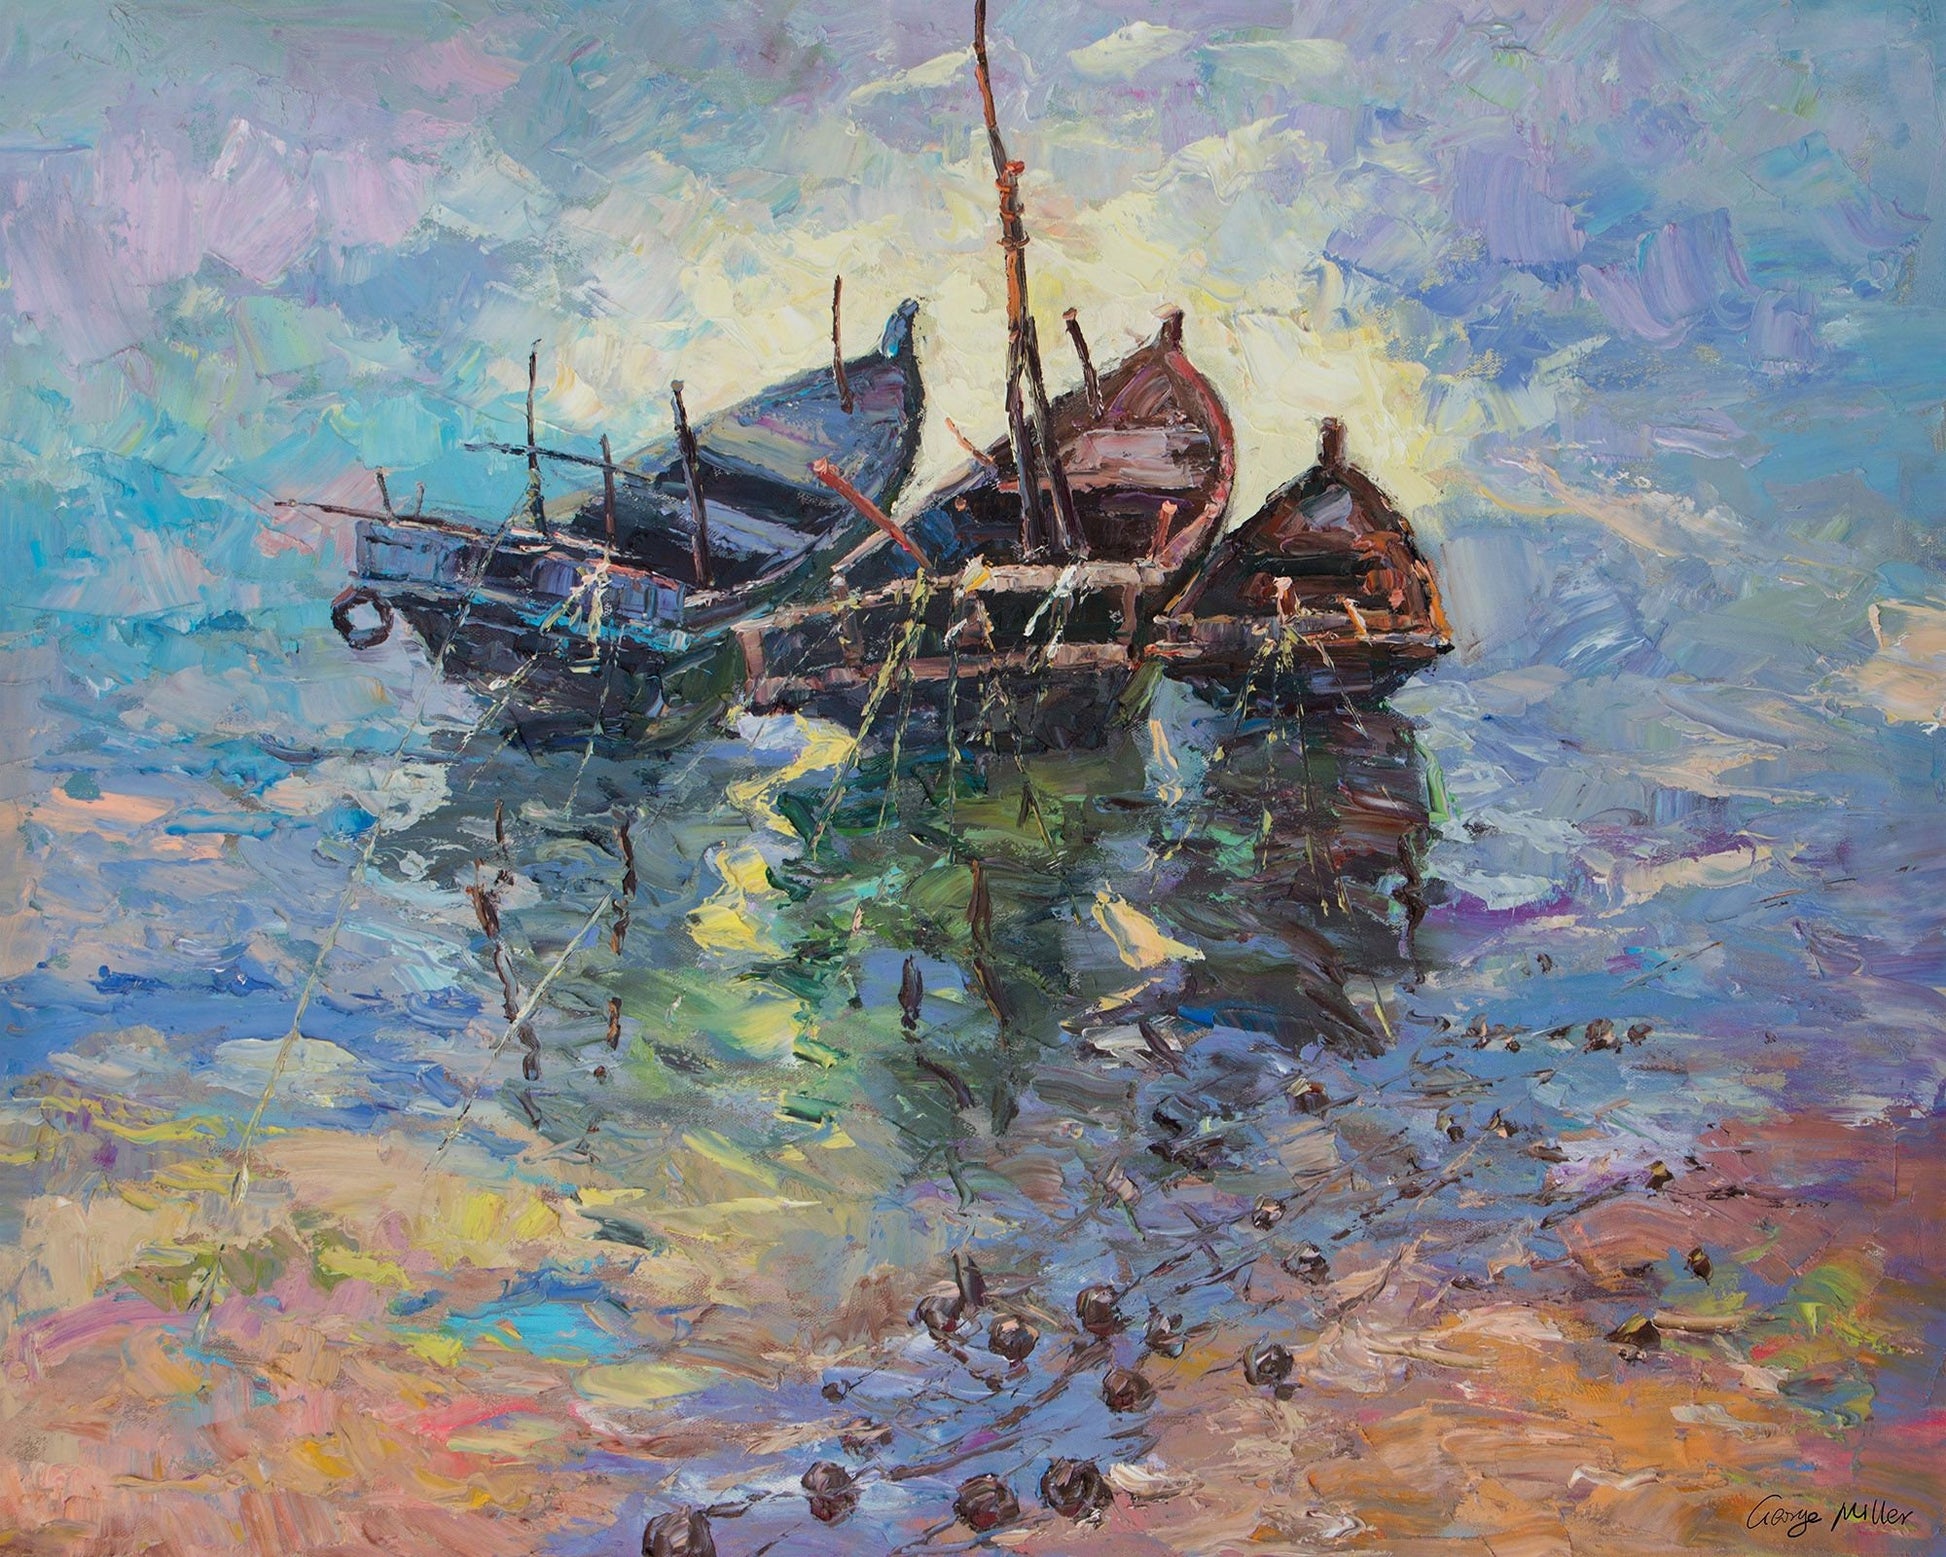 Large Oil Painting Fishing Boats at Sea, Canvas Painting, Contemporary Art, Living Room Decor, Large Oil Painting, Large Seascape Painting